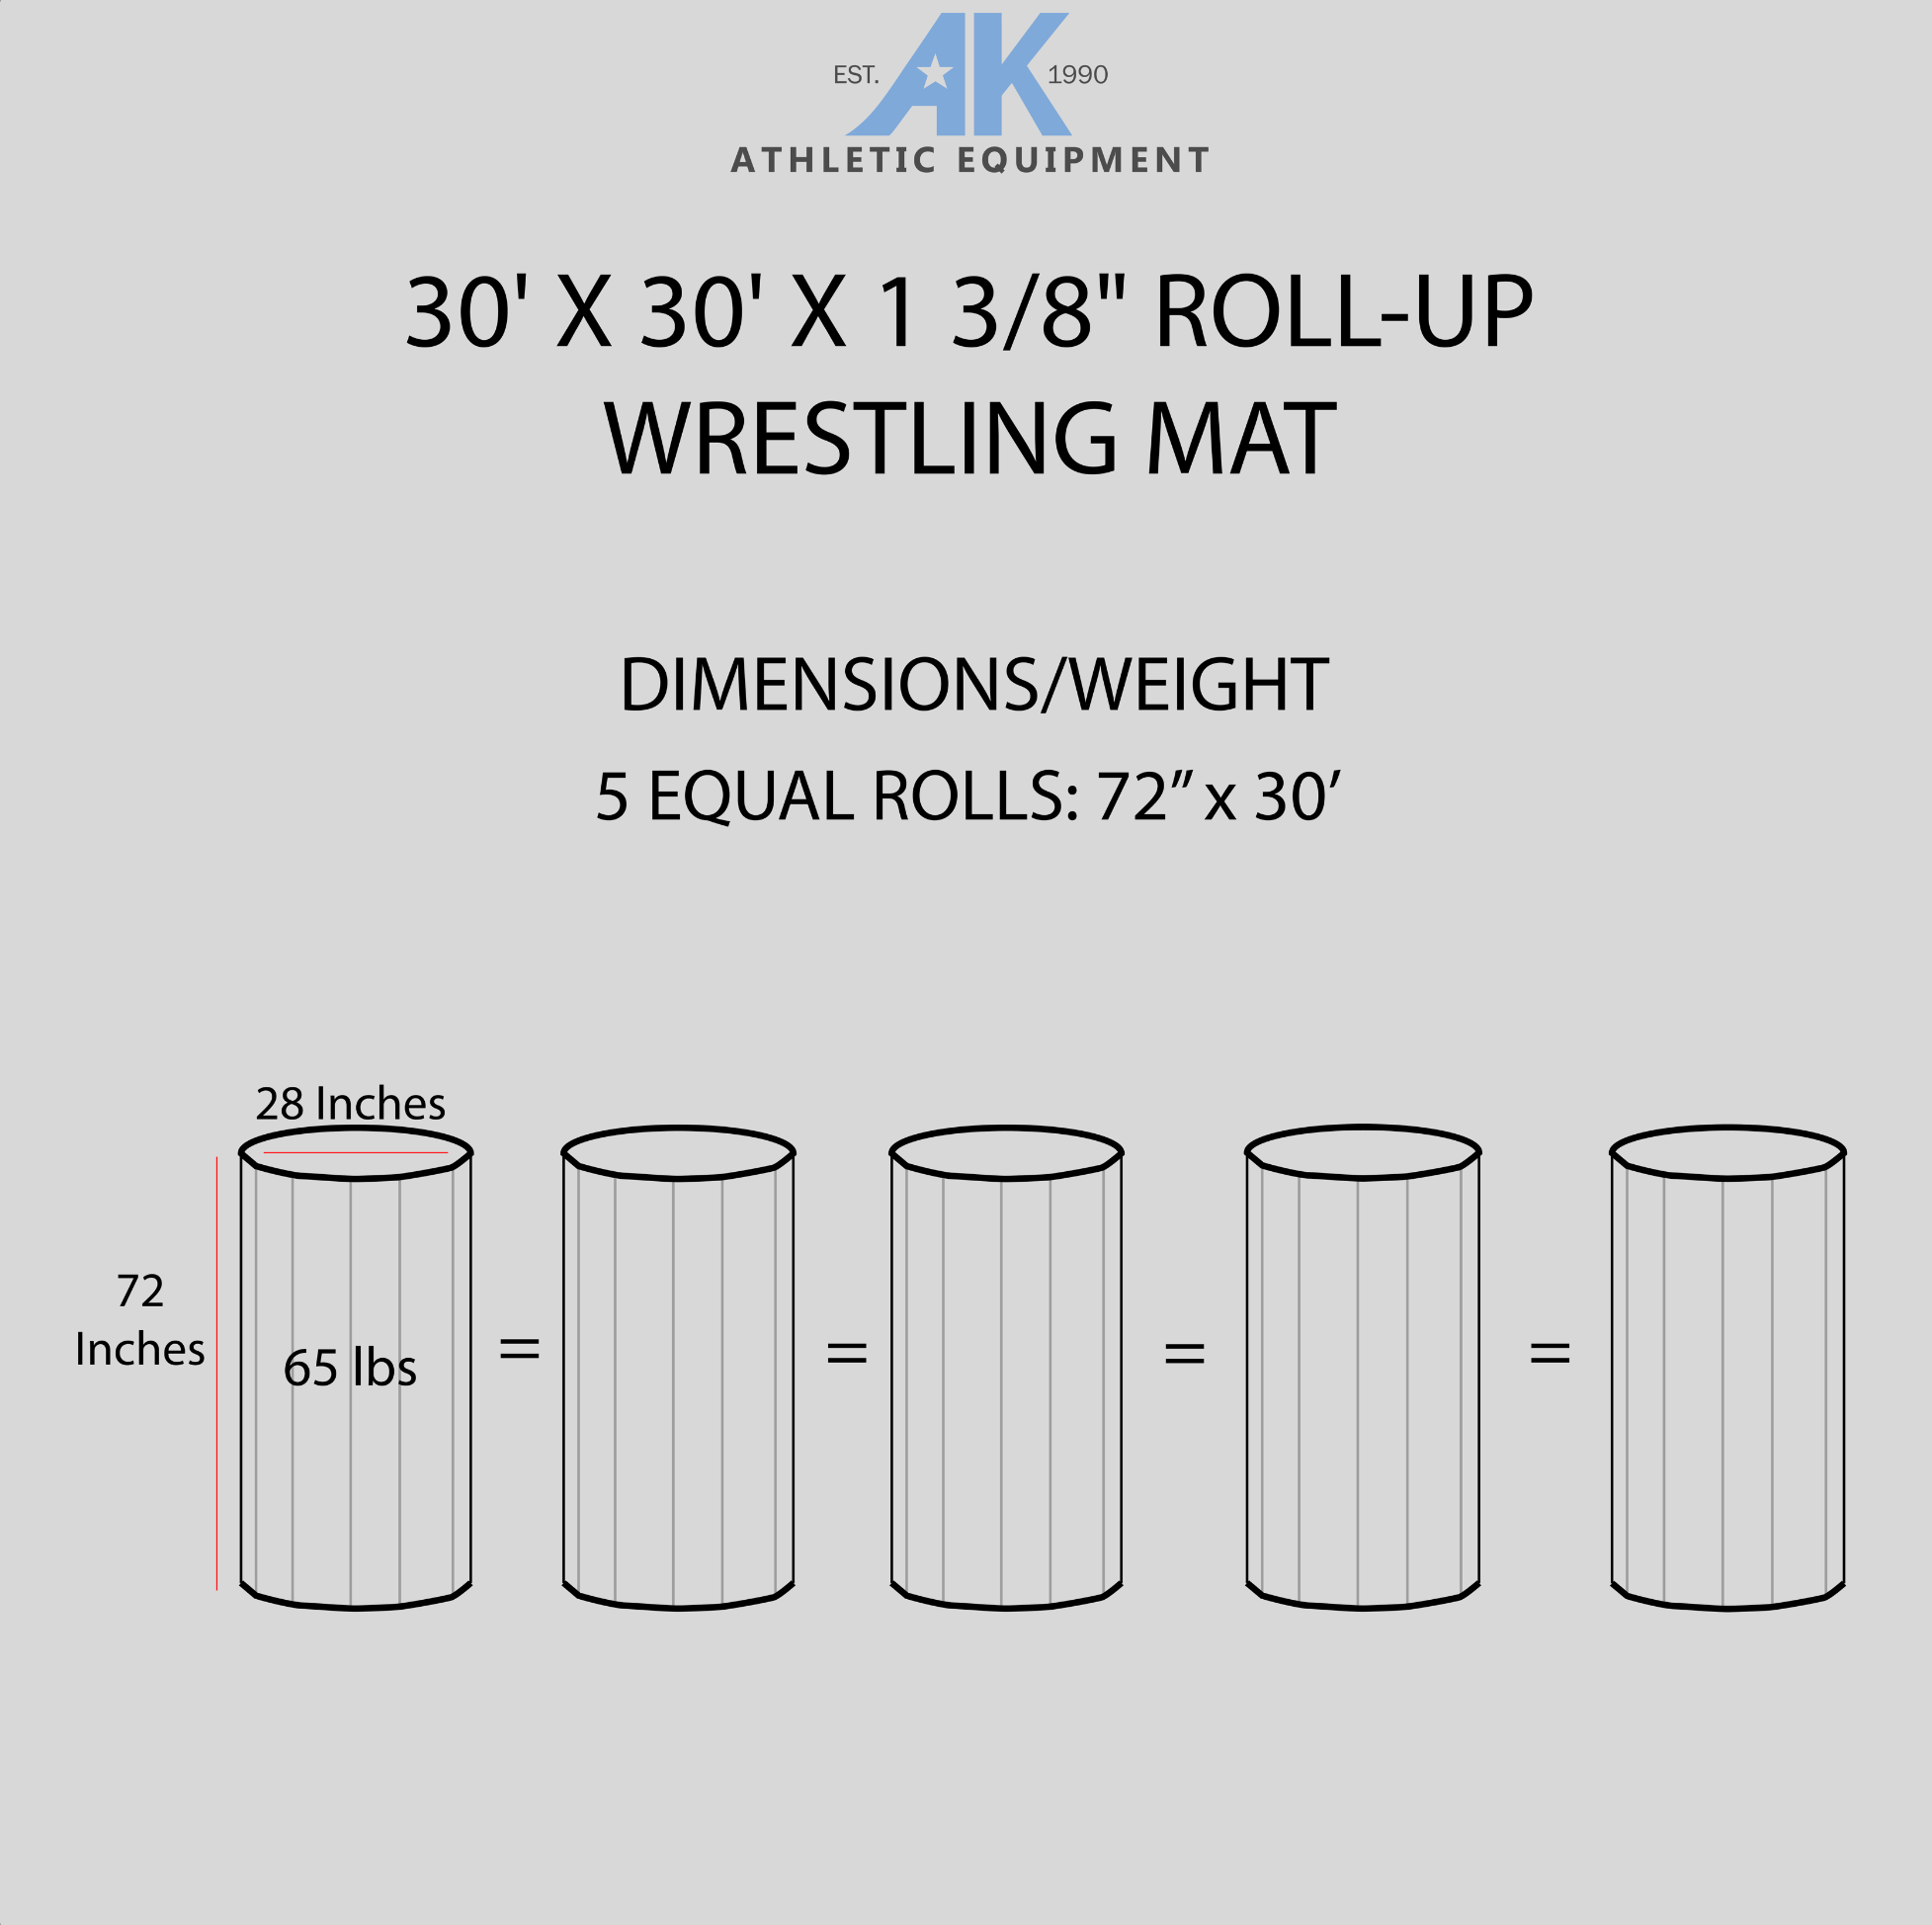 Wrestling Mat dimensional spec sheet from AK Athletics. Image displays the storage dimensions of AK Athletic Equipments' MMA/wrestling style mat.